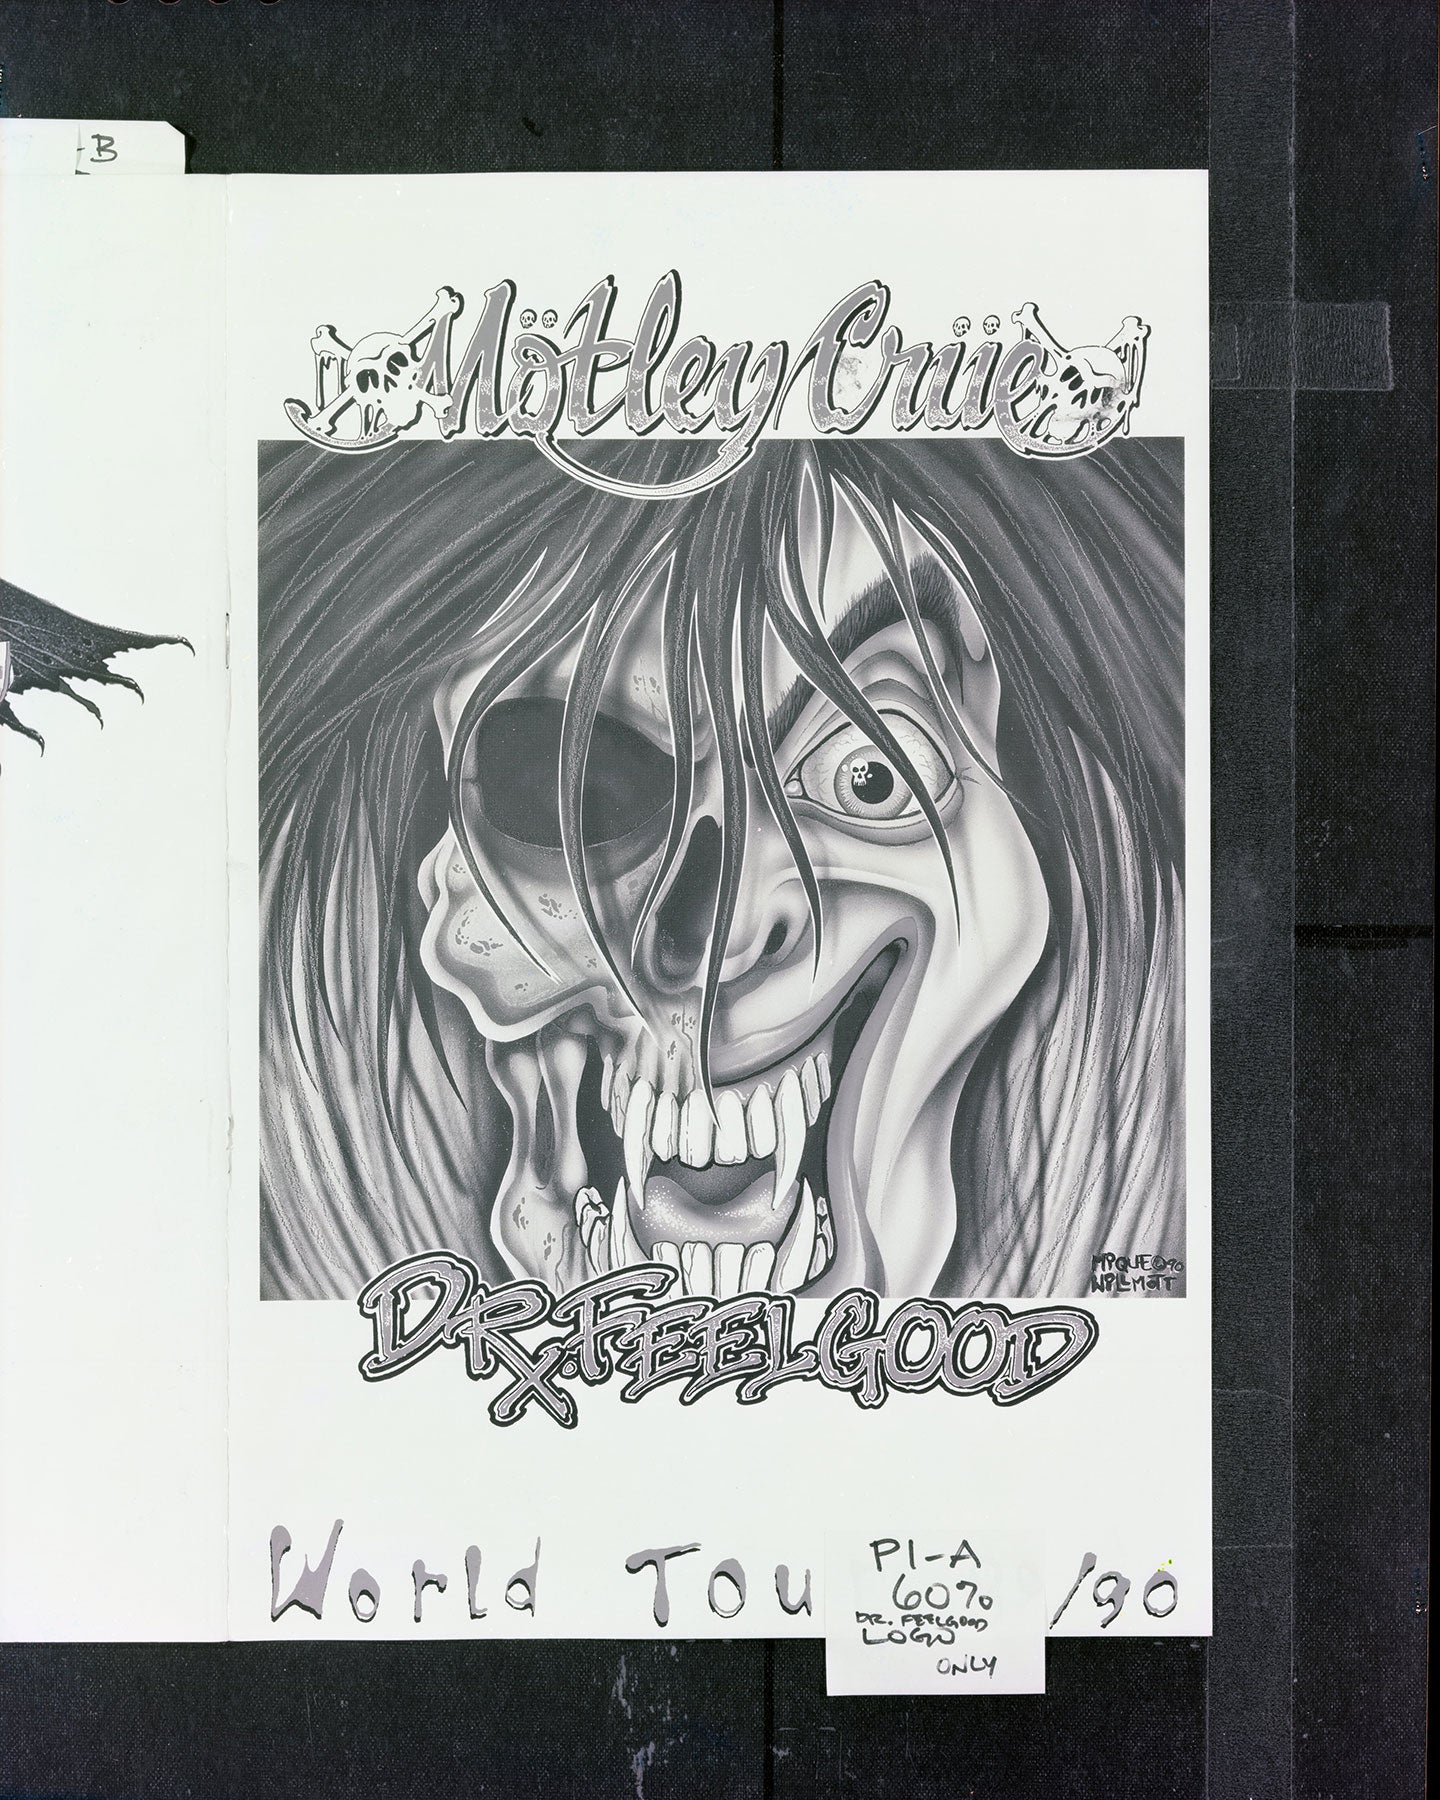 Artwork draft of the Dr. Feelgood Tour Book by MiQ 1990